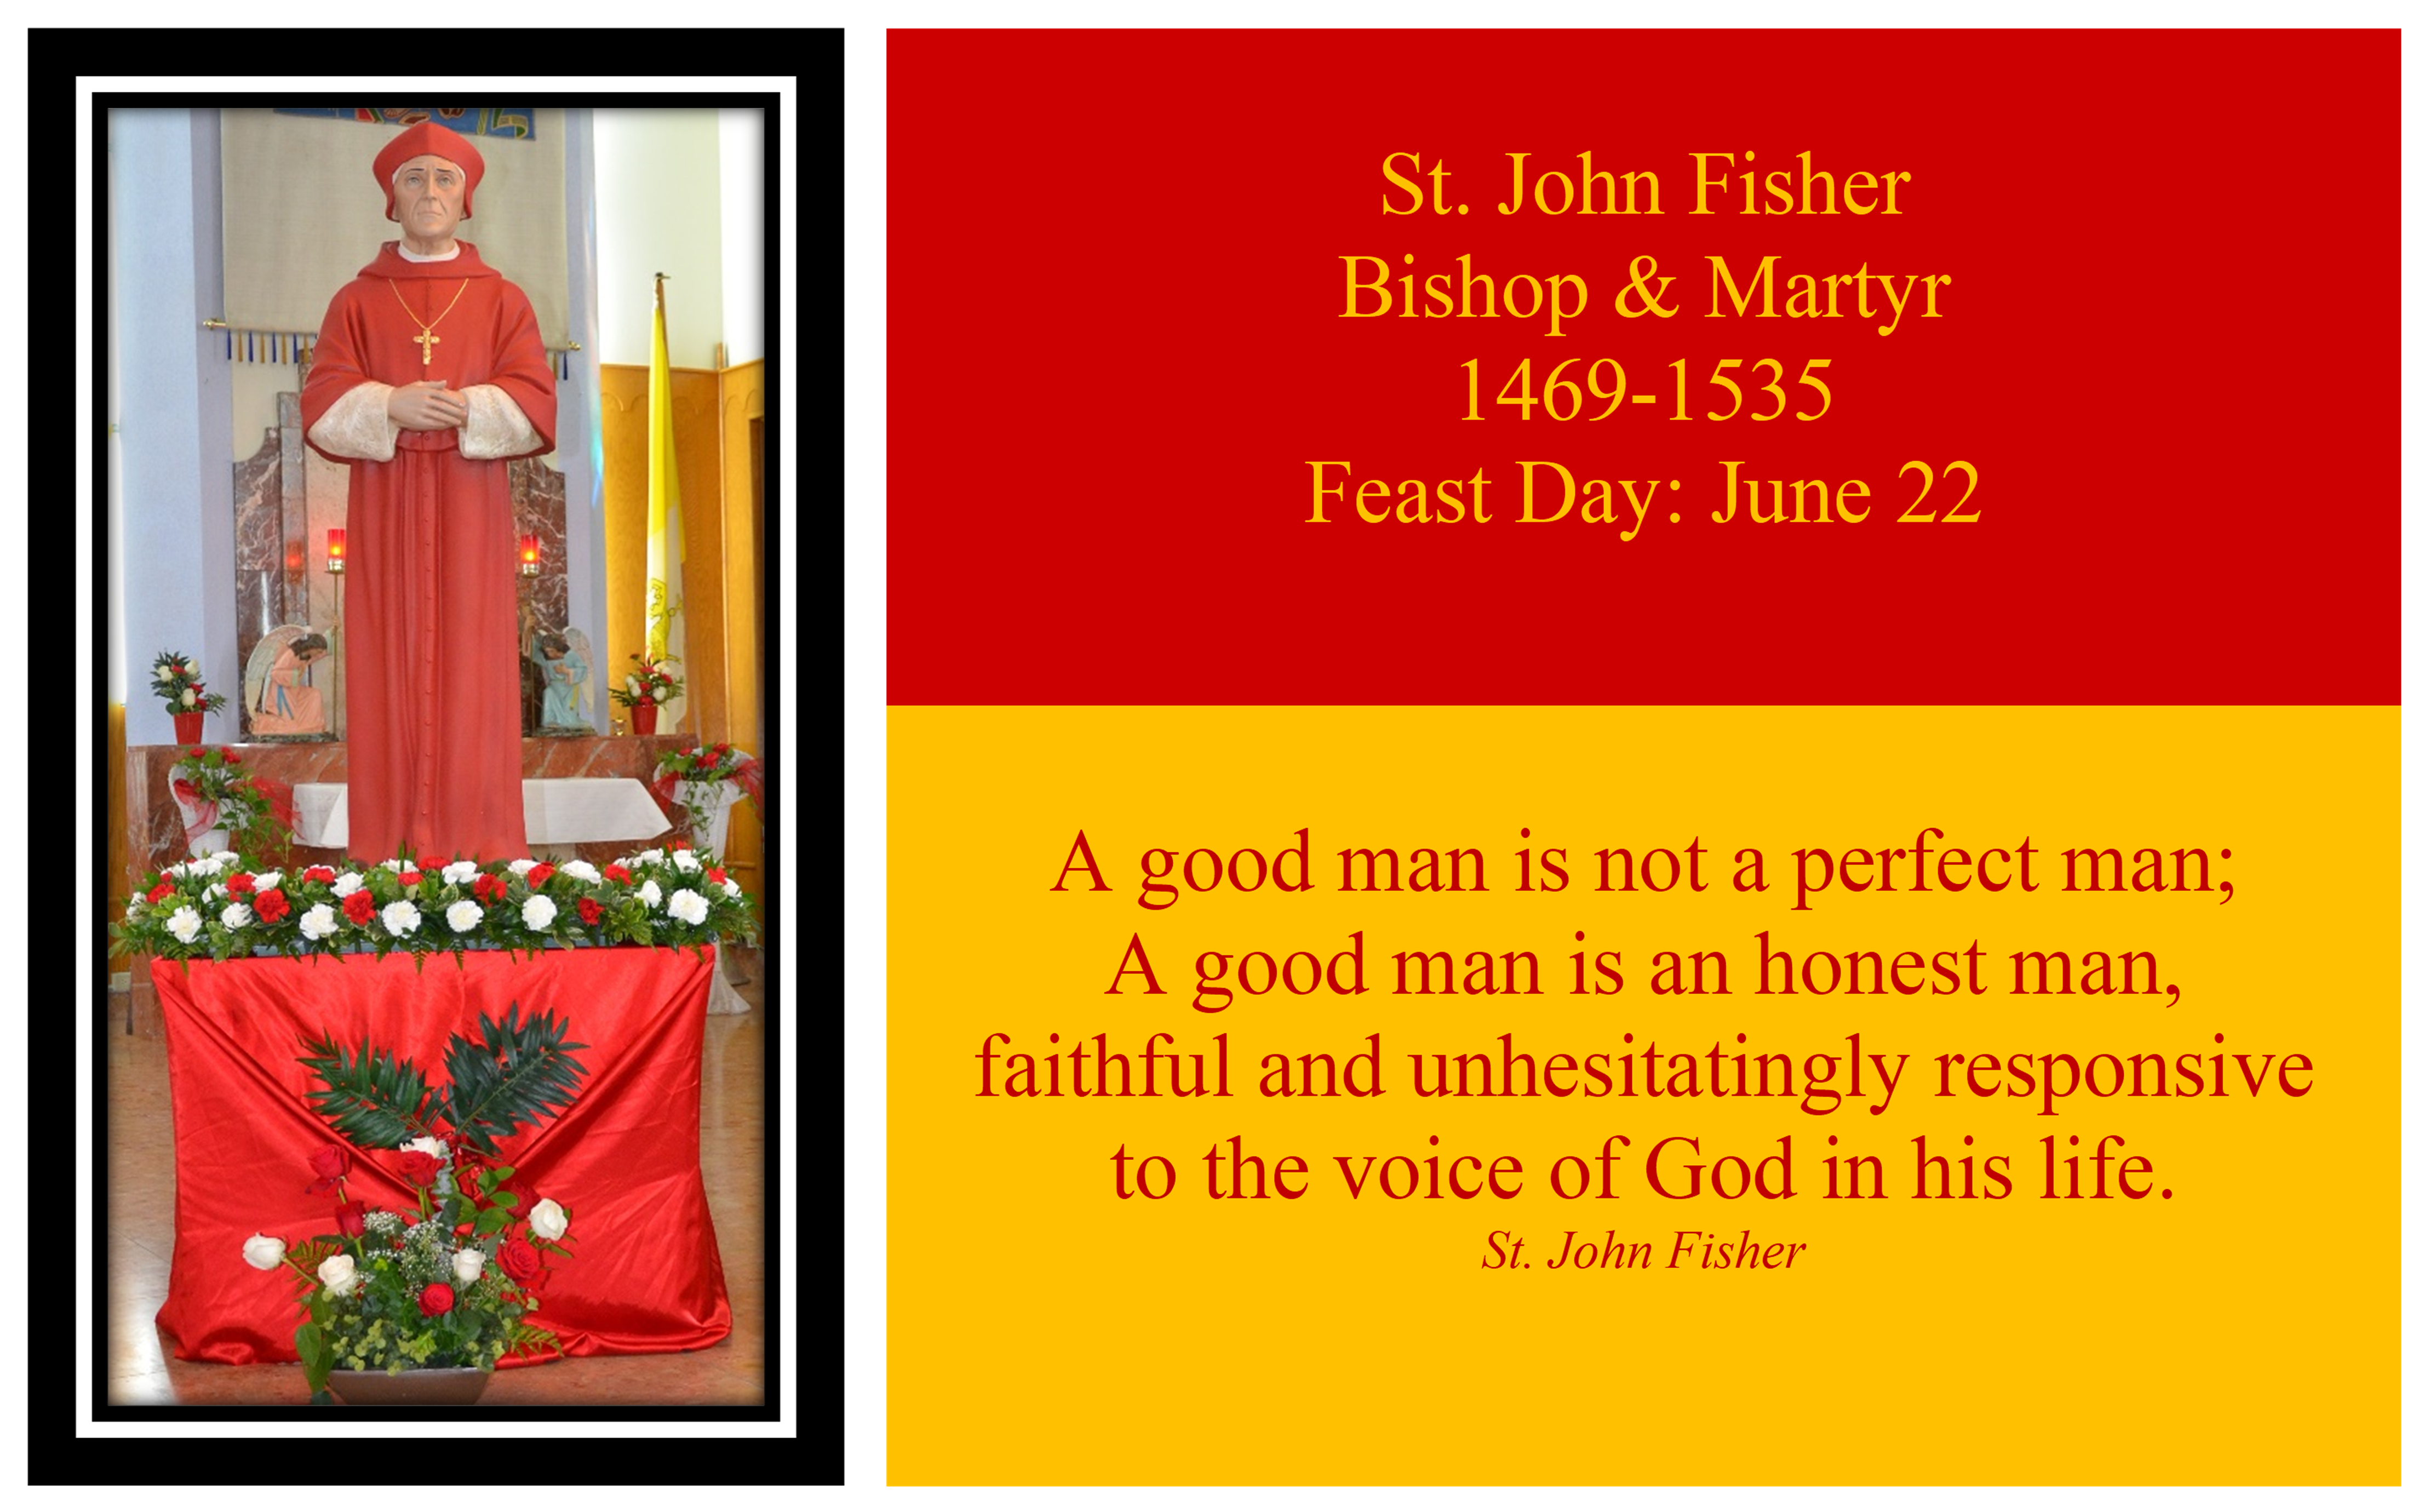 picture of statue of St. John Fisher, quote from the saint and his anniversary dates